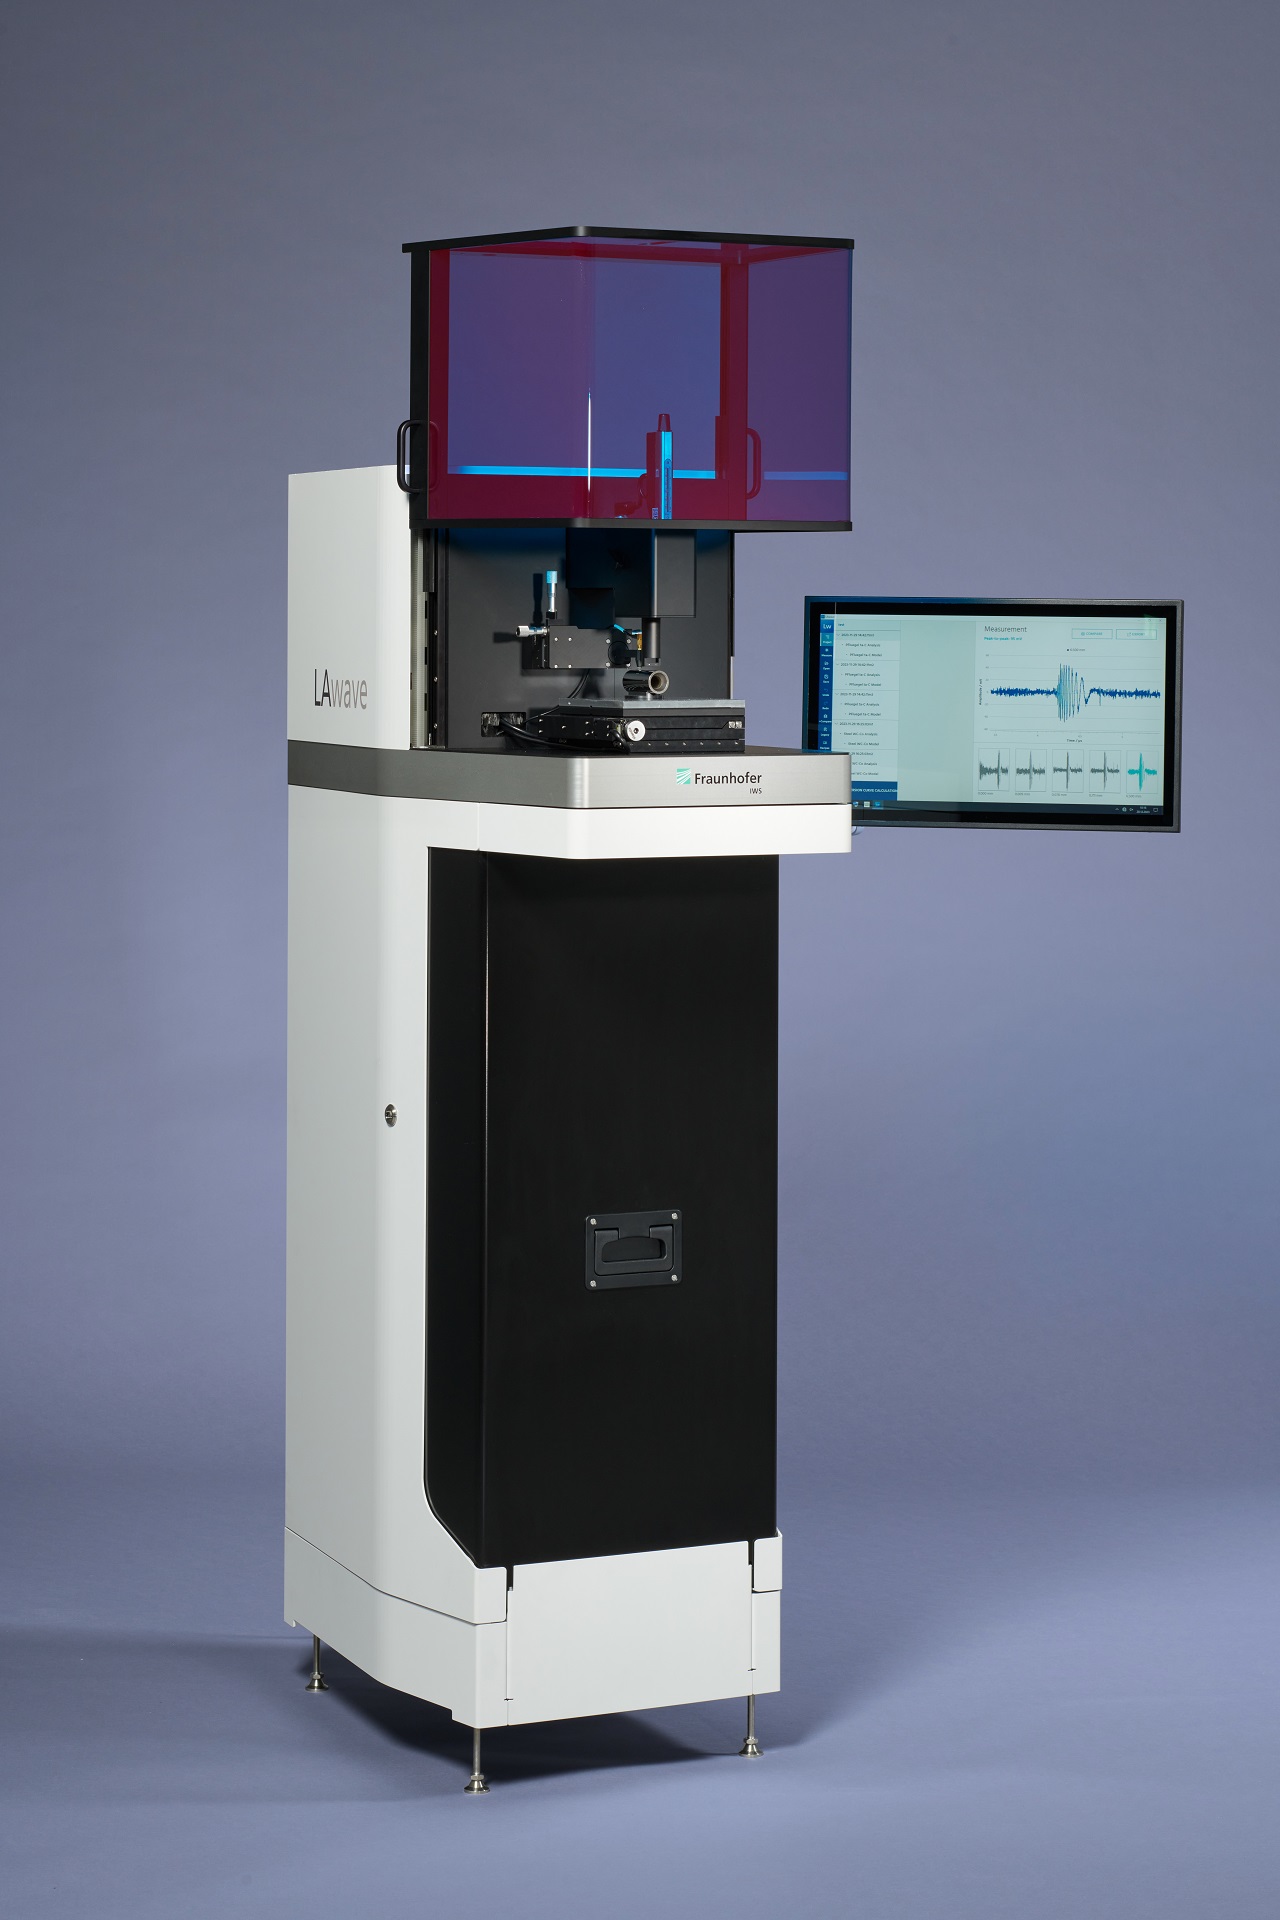 LAwave measuring system for fast and non-destructive characterization of small and medium-sized components.